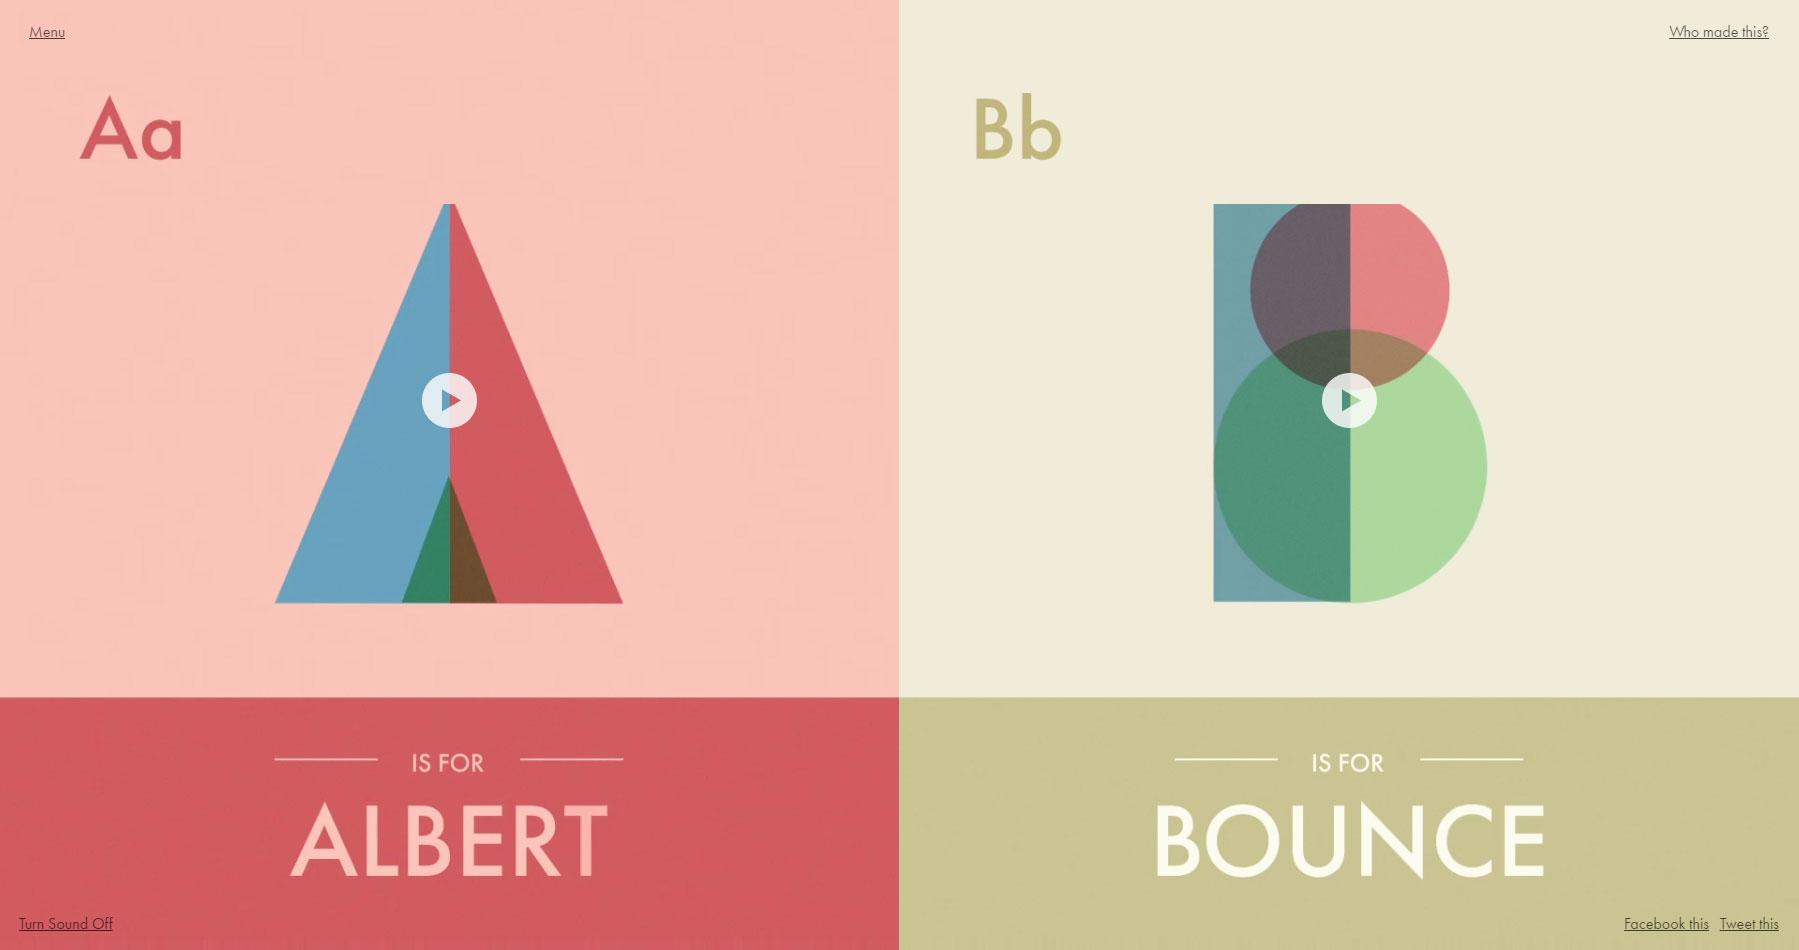 A is for Albert - Website of the Day